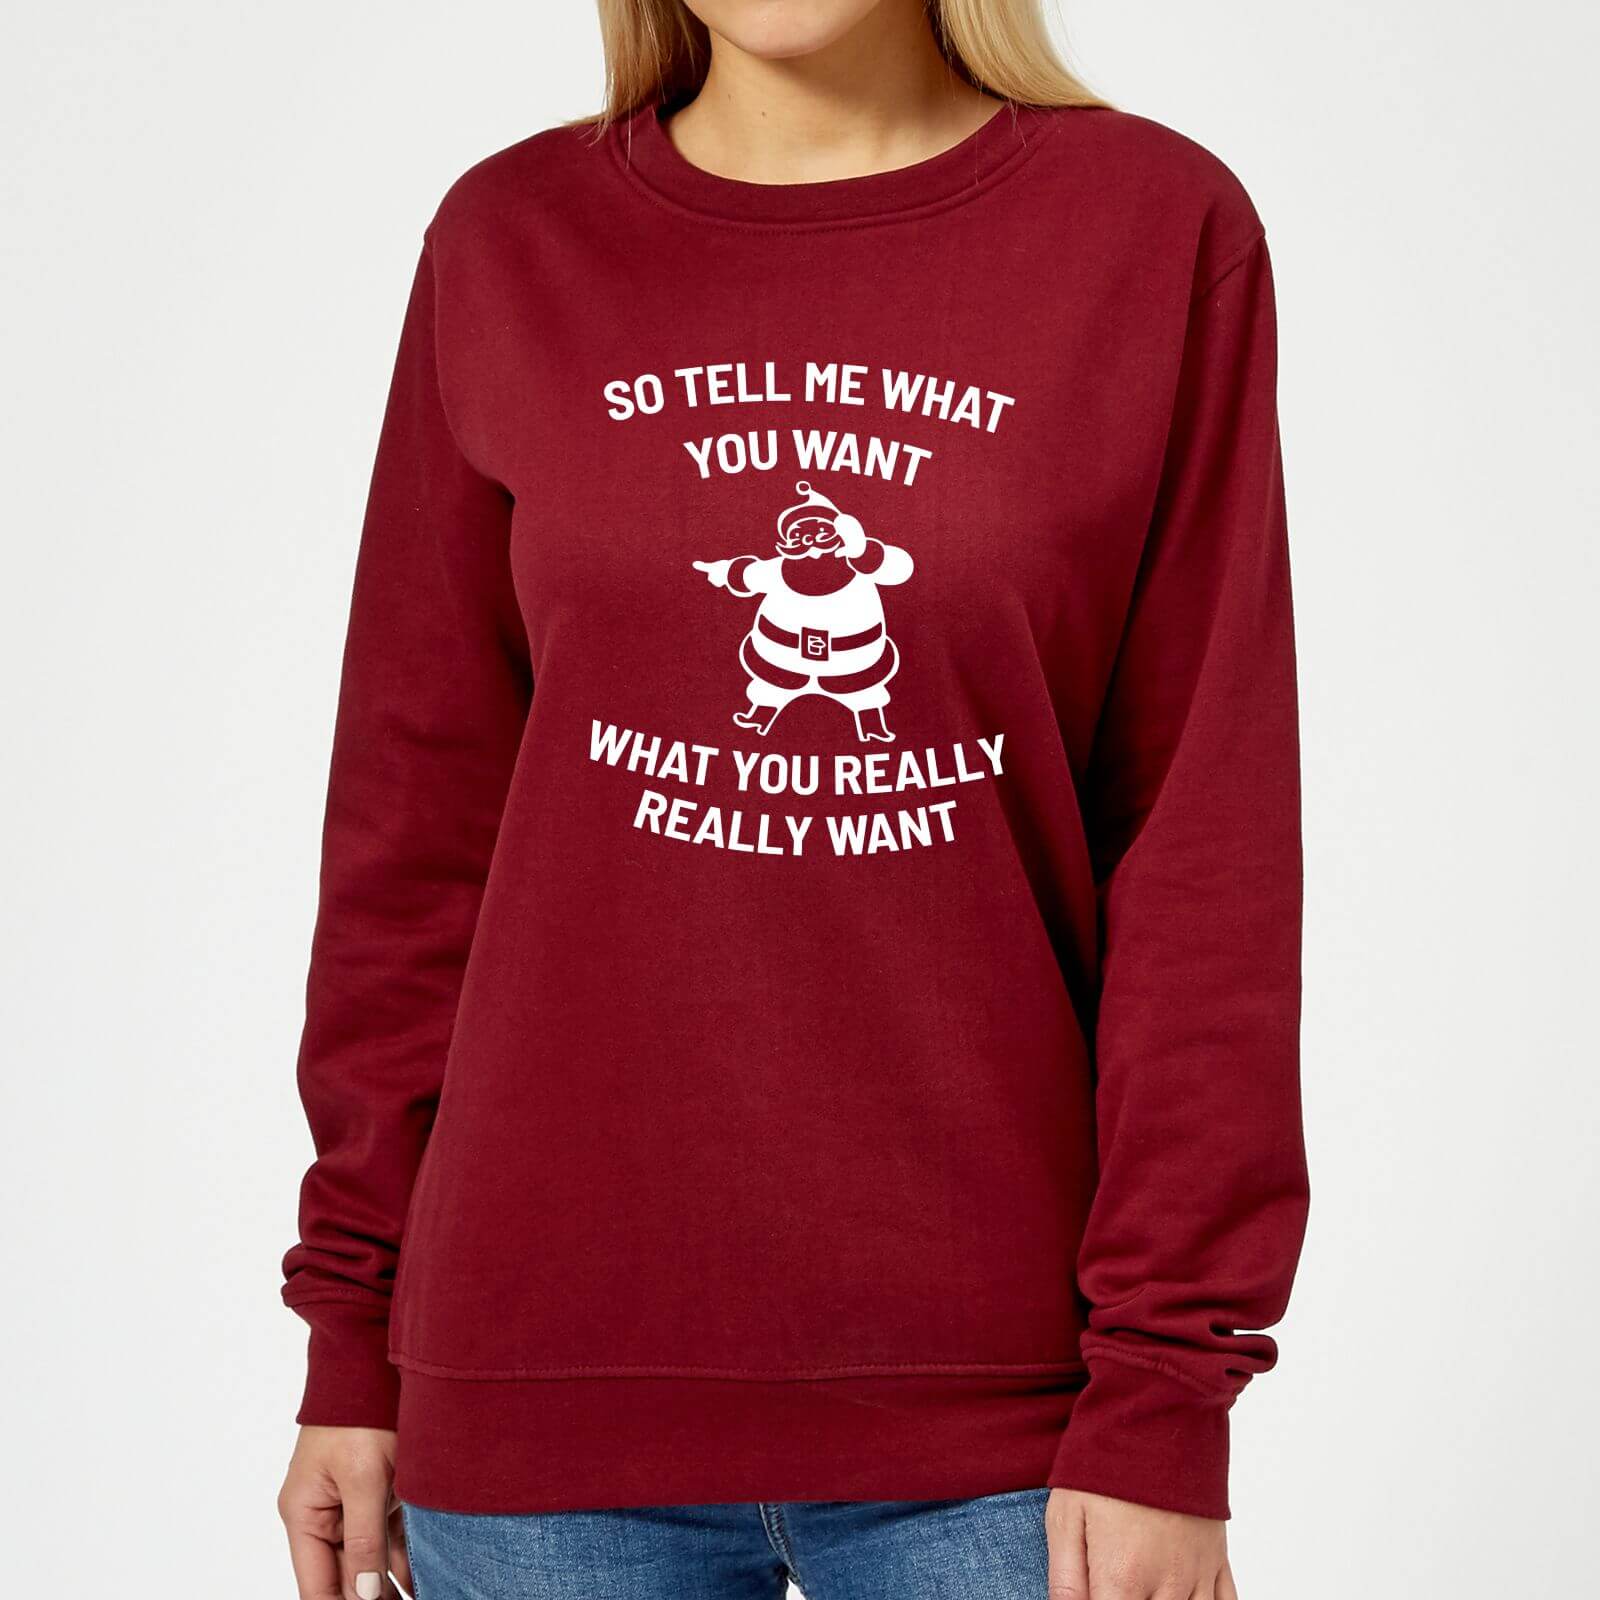 So Tell Me What You Want What You Really Really Want Women's Christmas Sweatshirt - Burgundy - XS